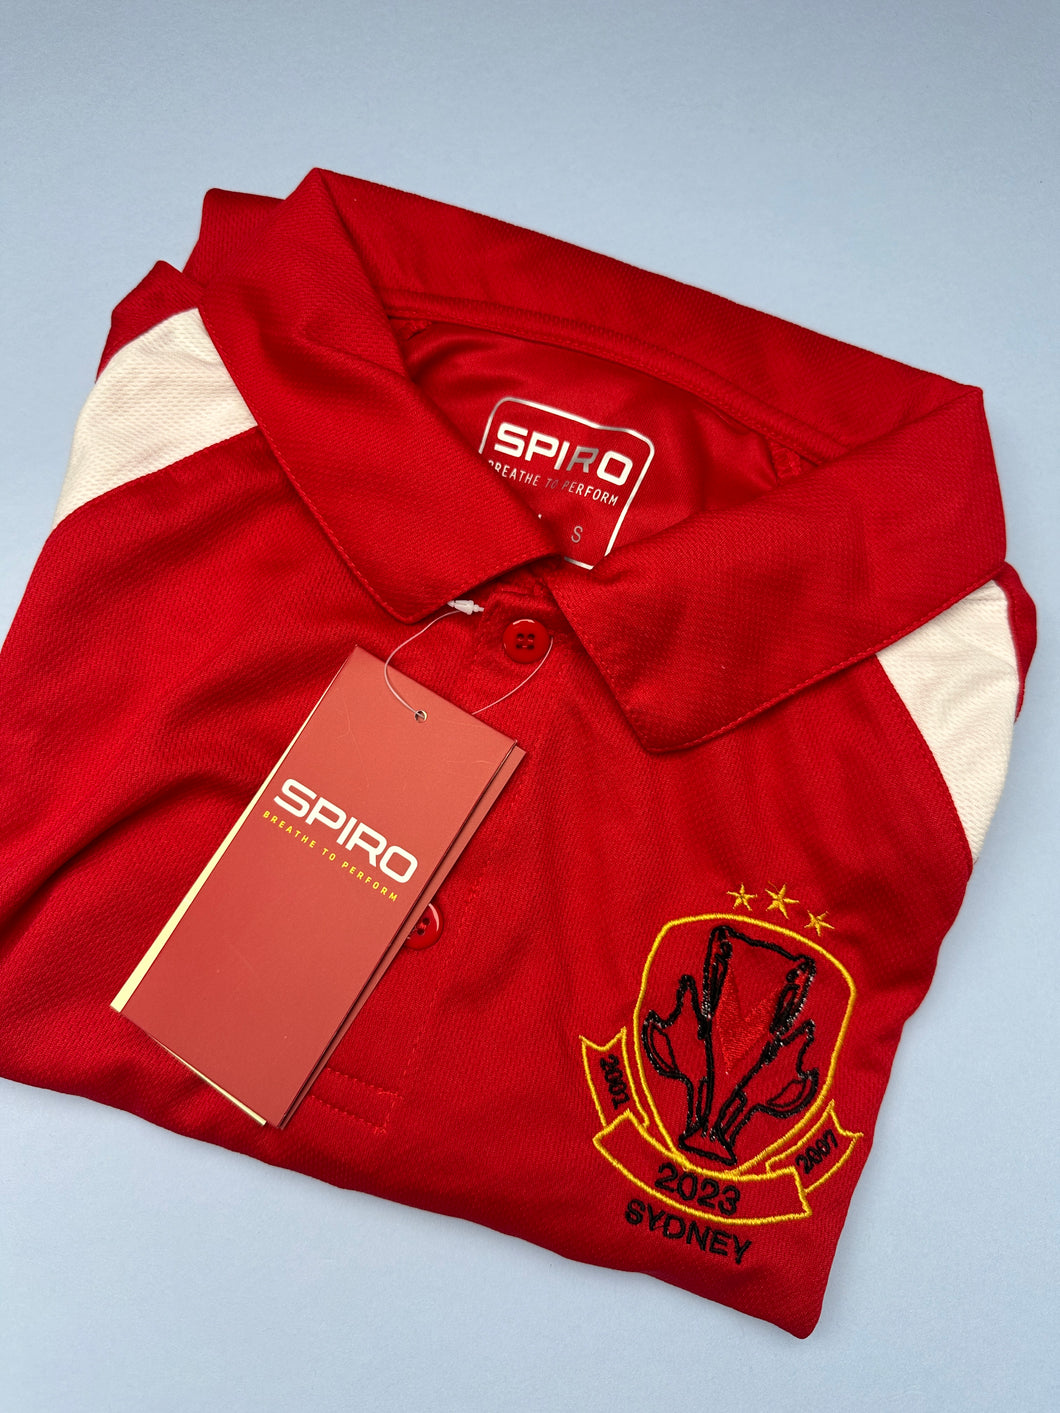 PRACTICALLY IMPERFECT - Champions Small Polo Shirt